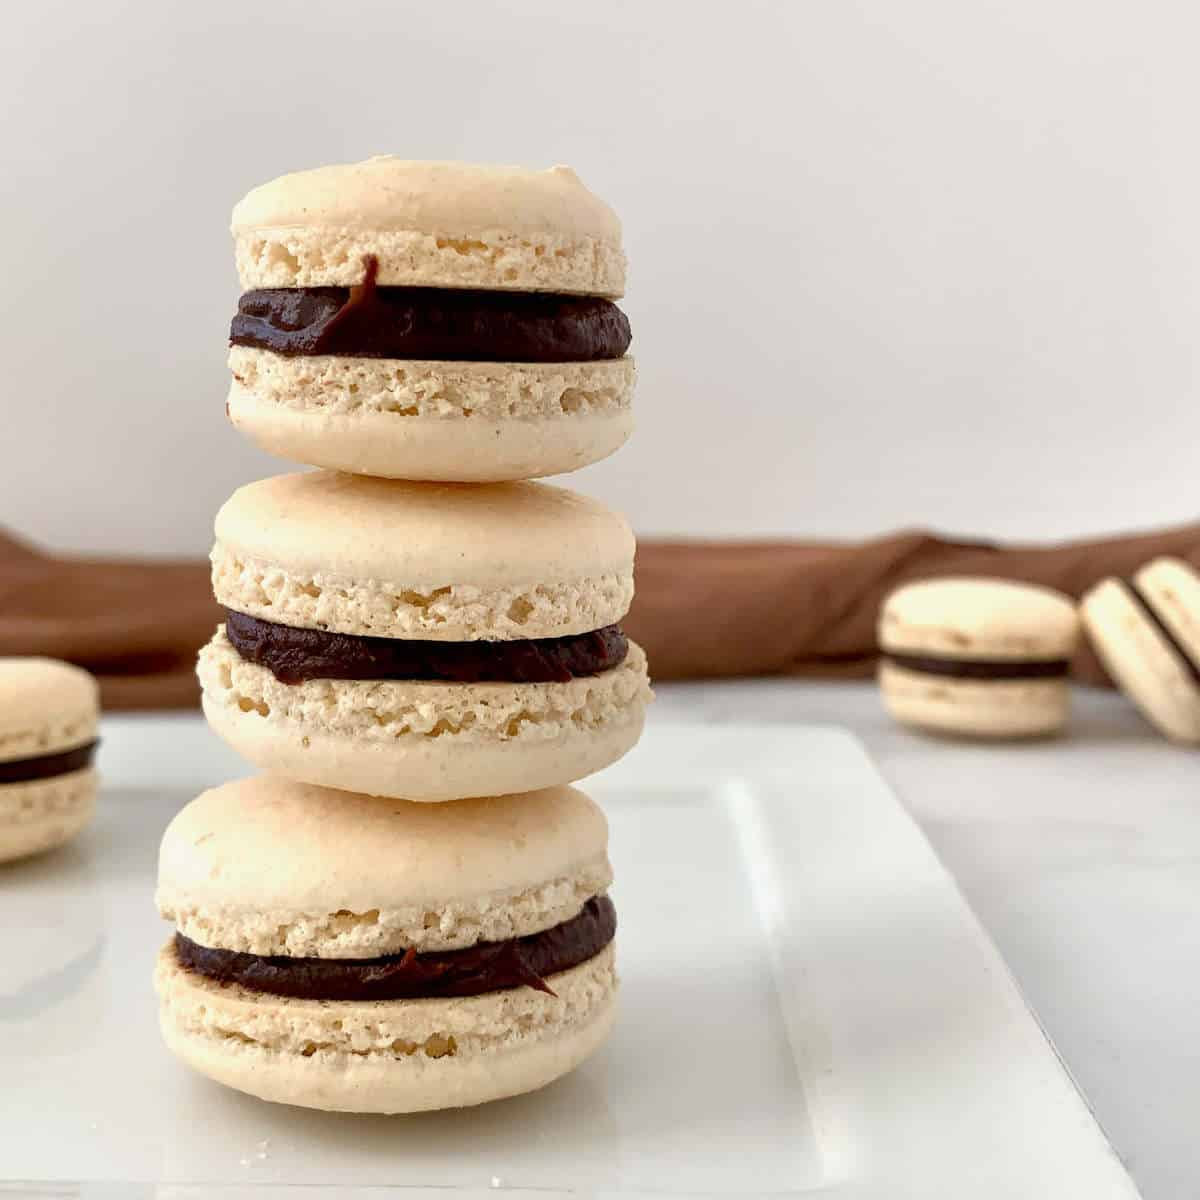 Italian Meringue Macarons stacked on white plate with some in background.